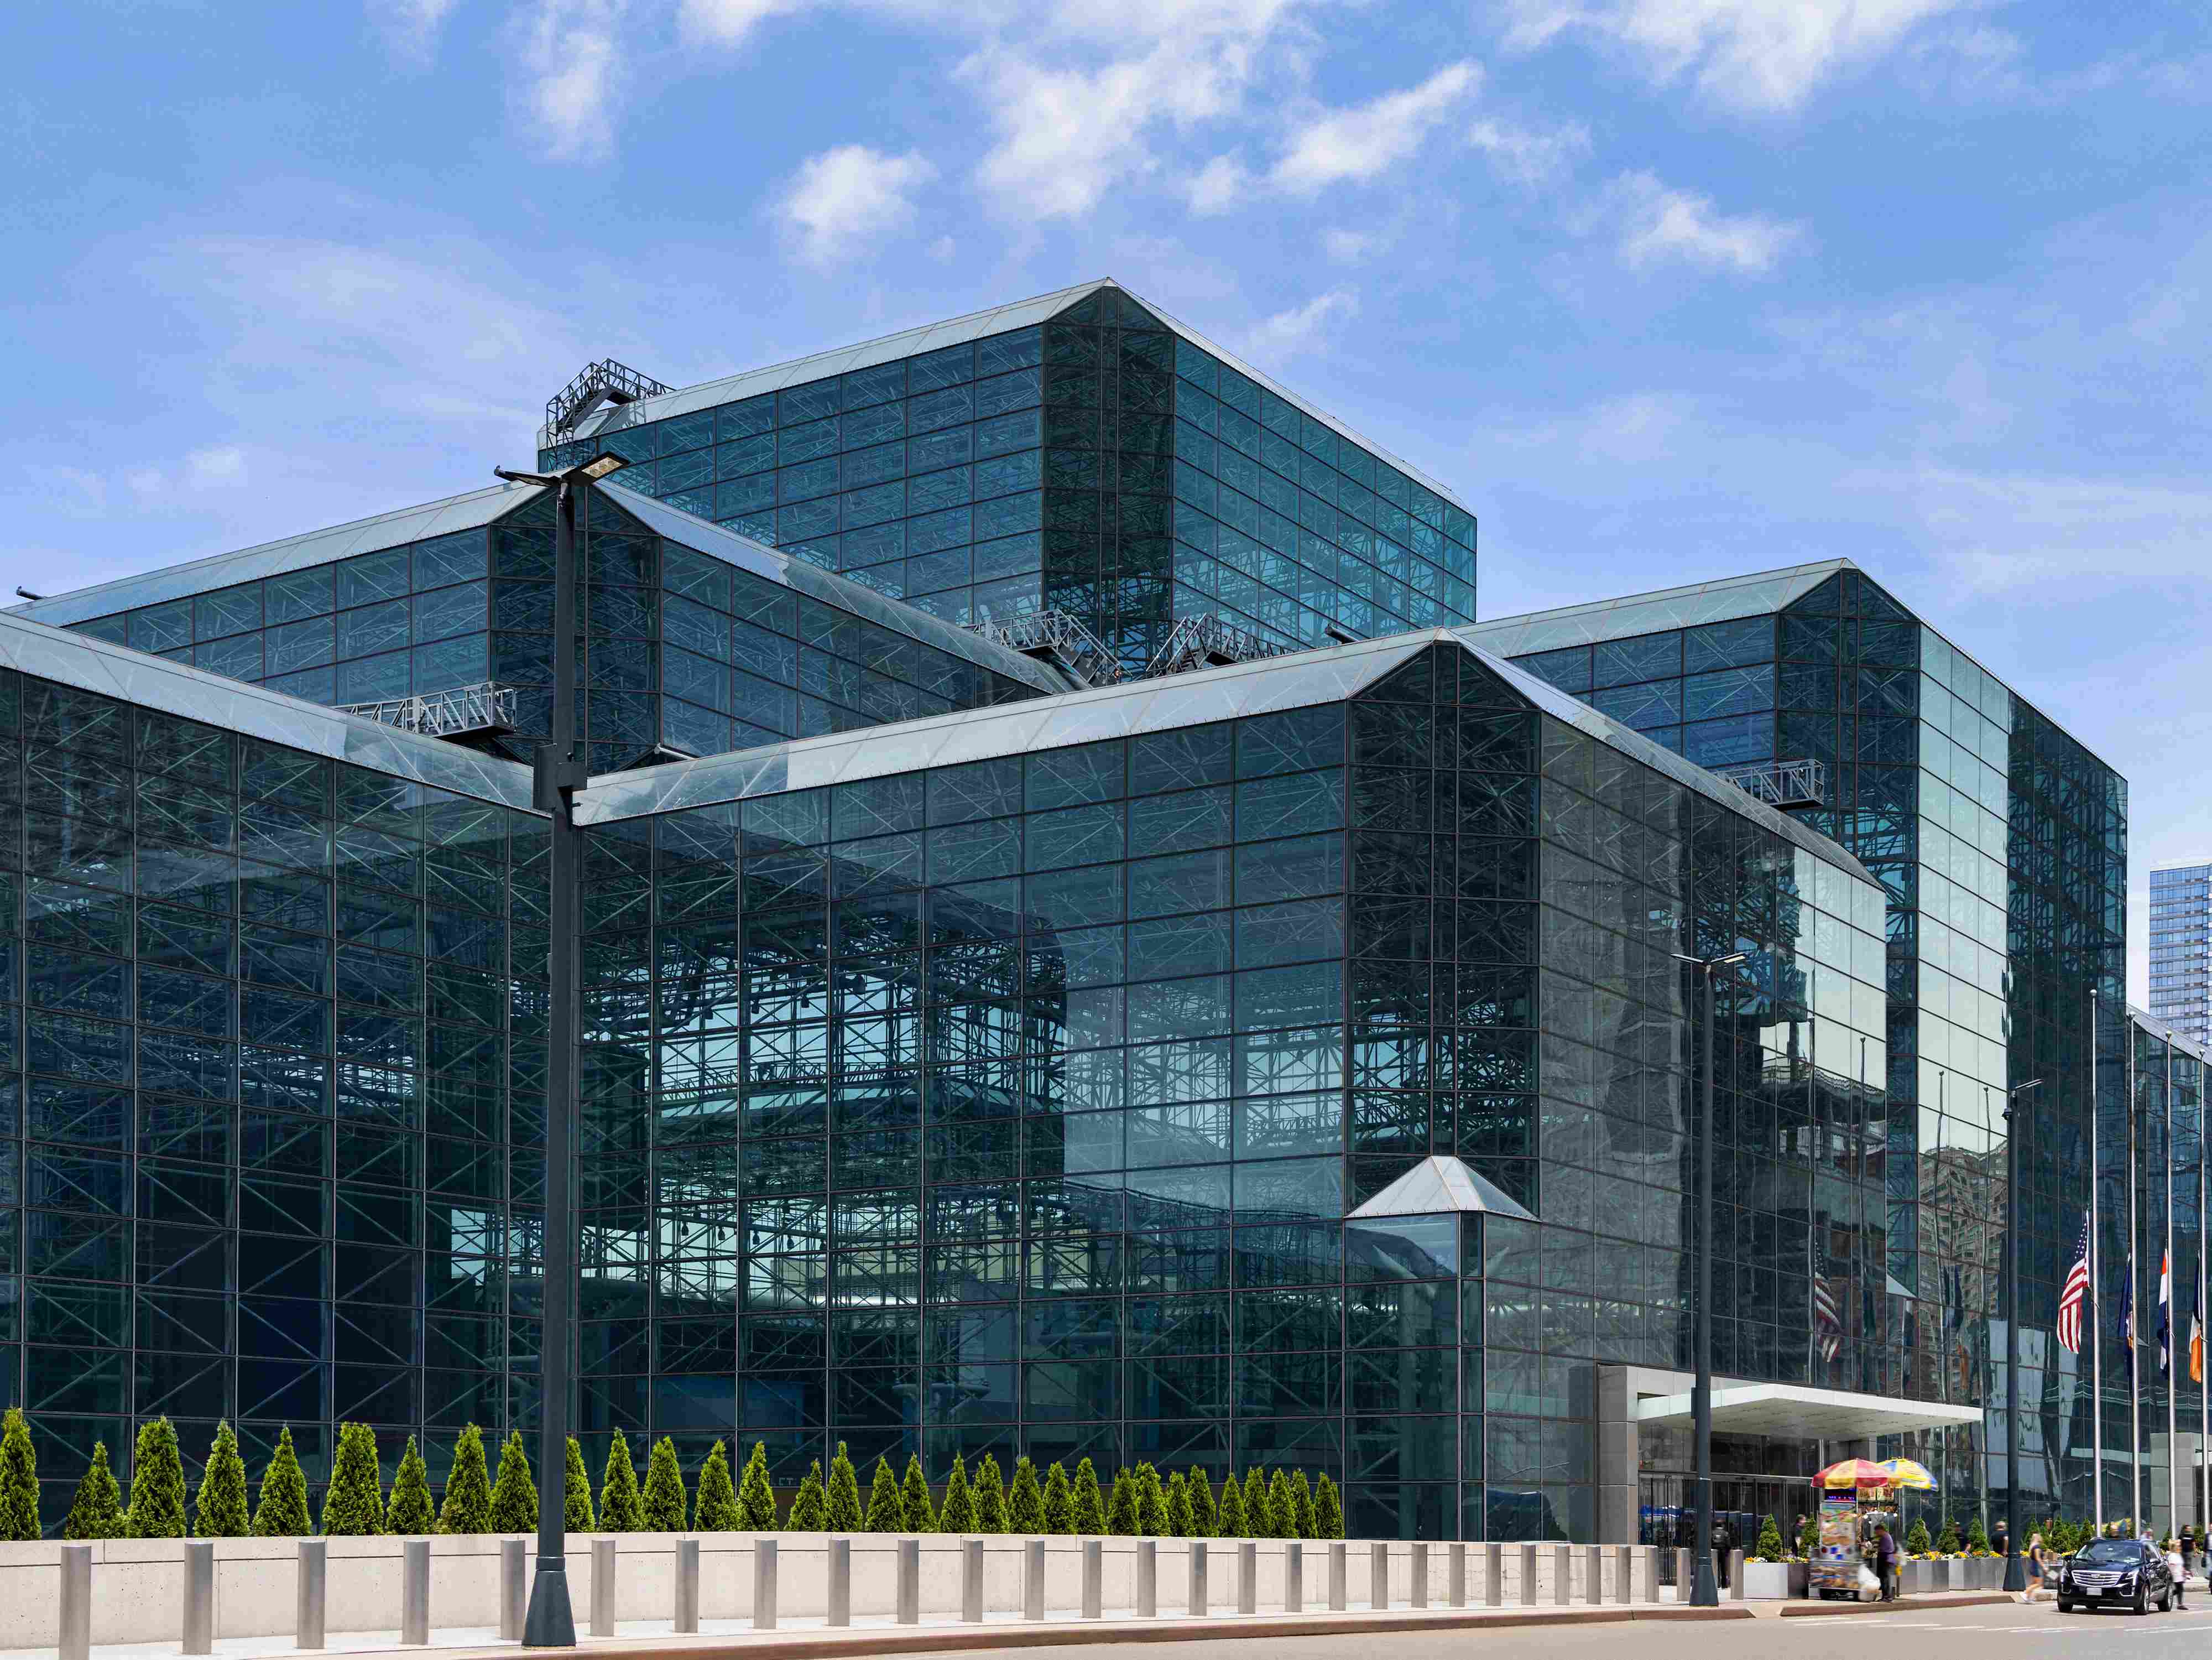 The Jacob Javits Convention Center is near our Manhattan hotel.